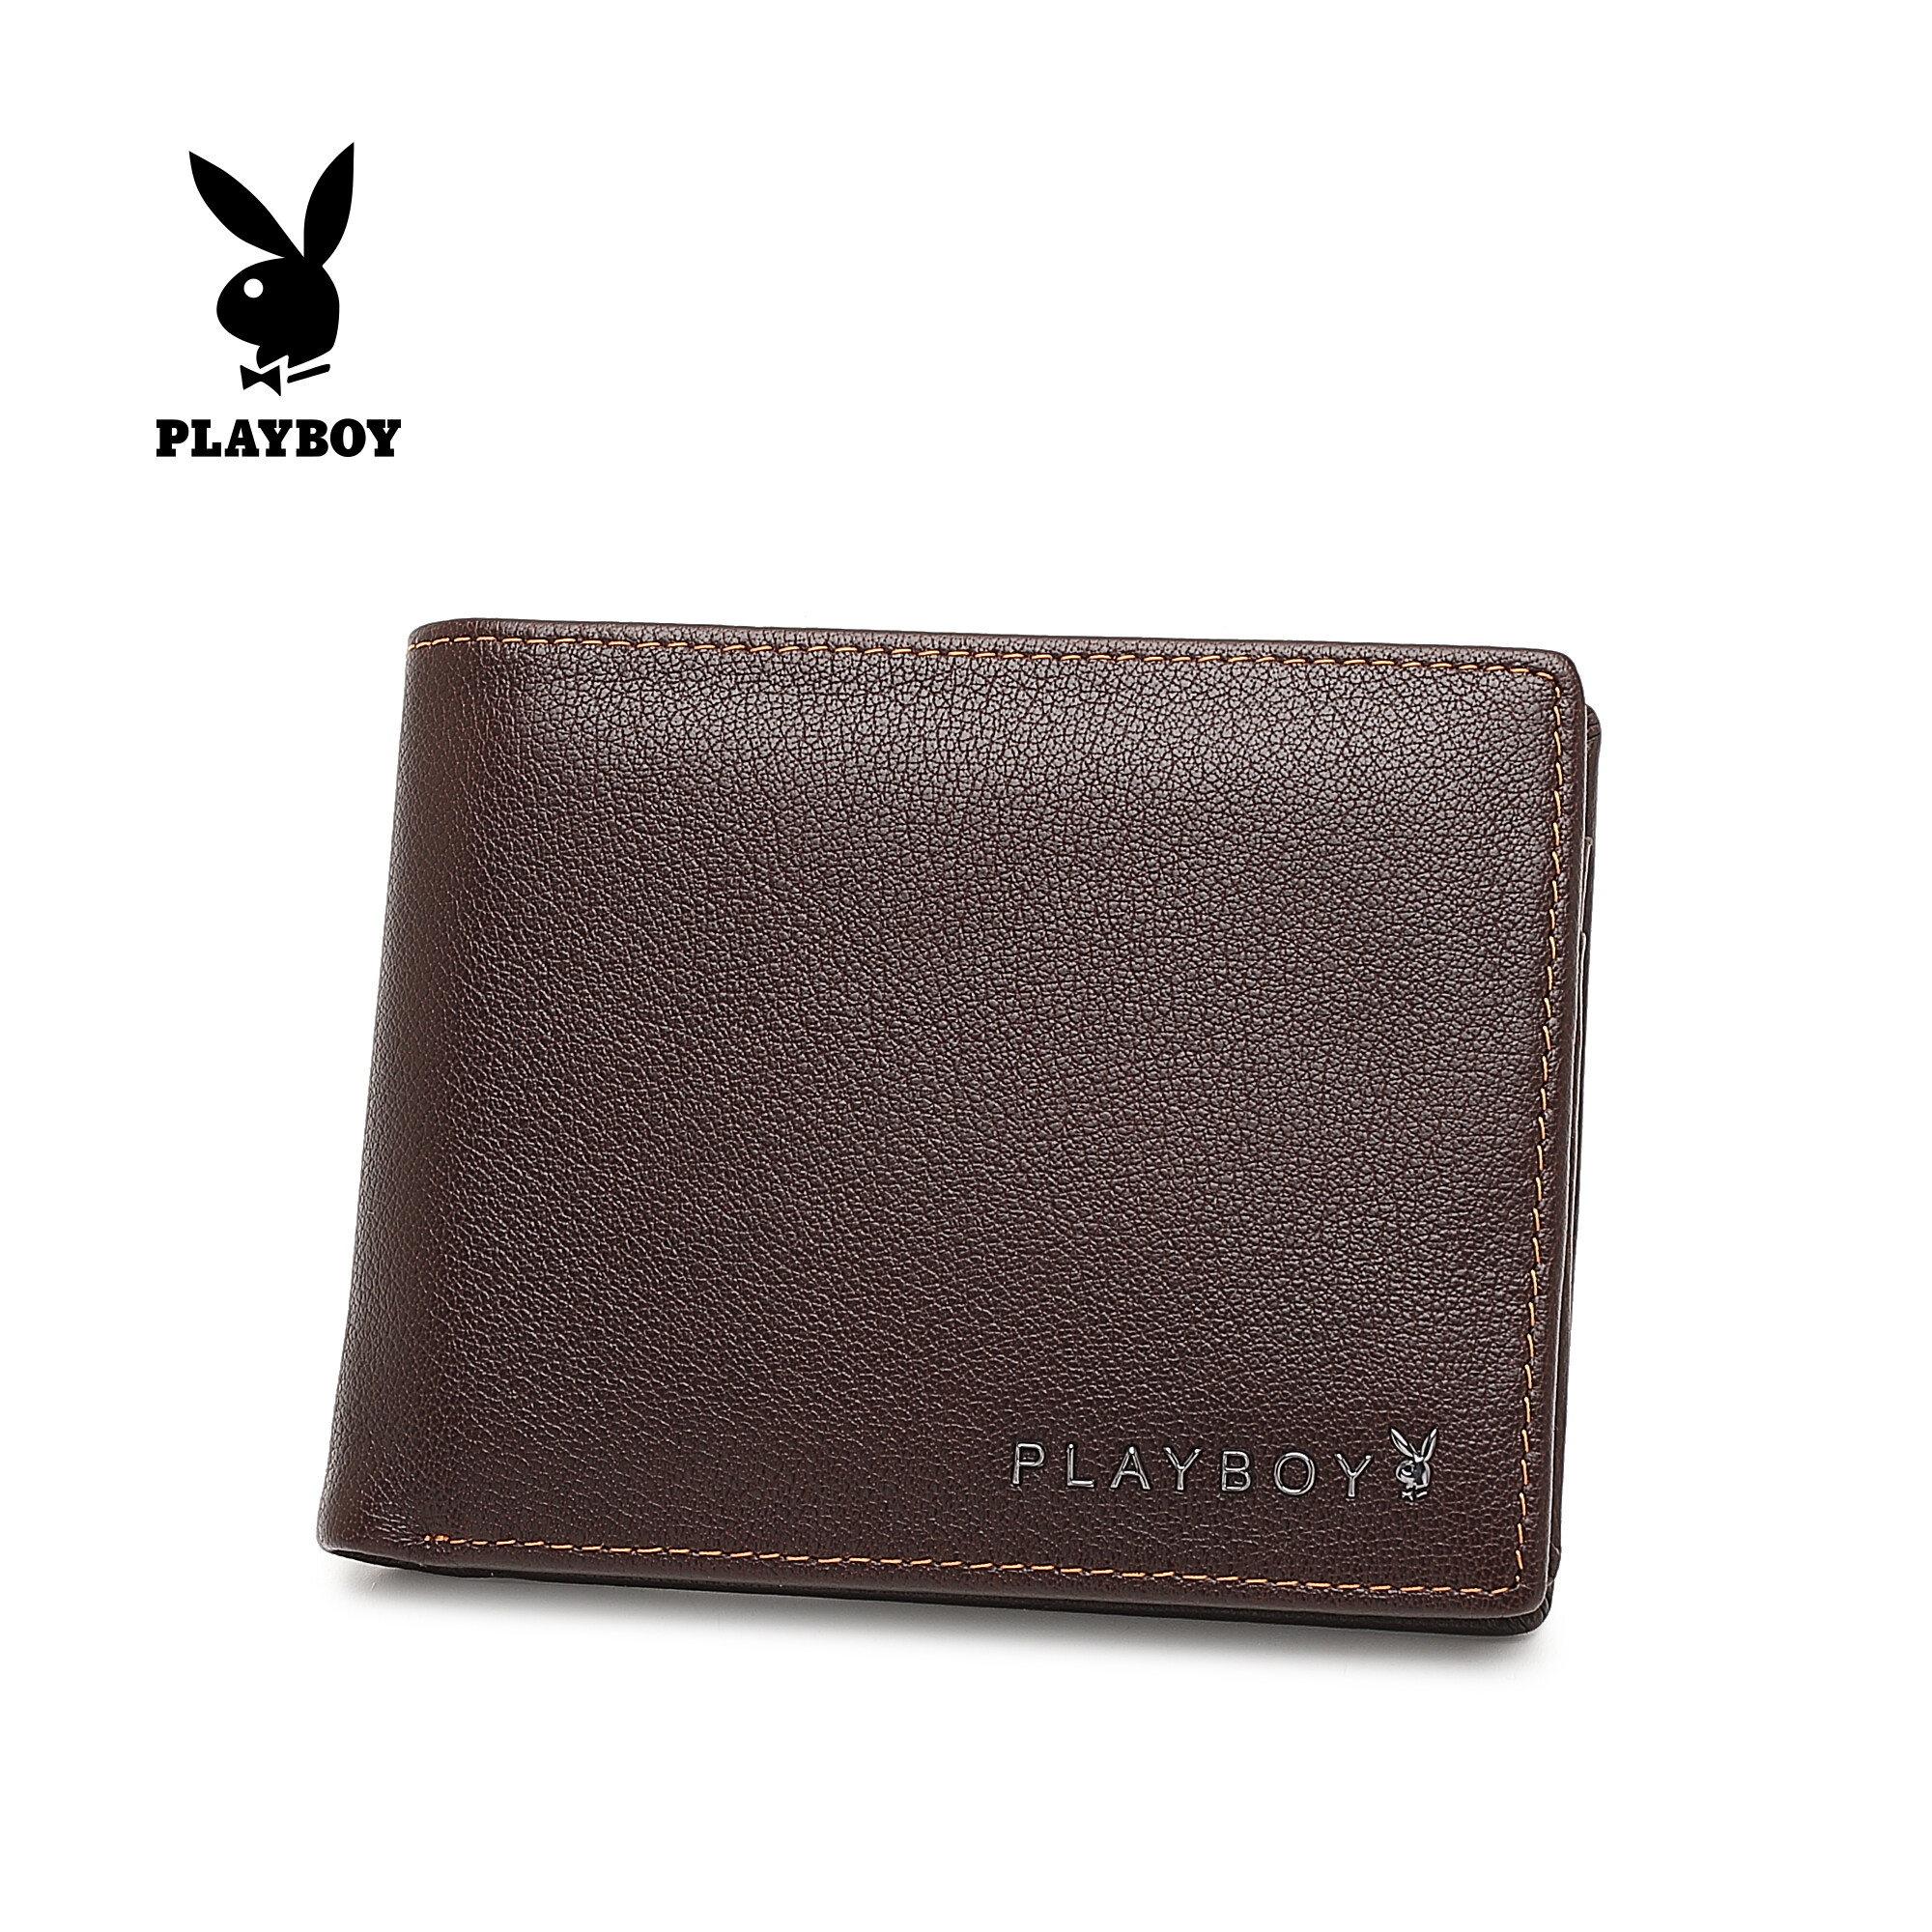 Playboy Genuine Leather RFID Wallet PW 278-2/PW 279-4/PW 280-2 Multi Color